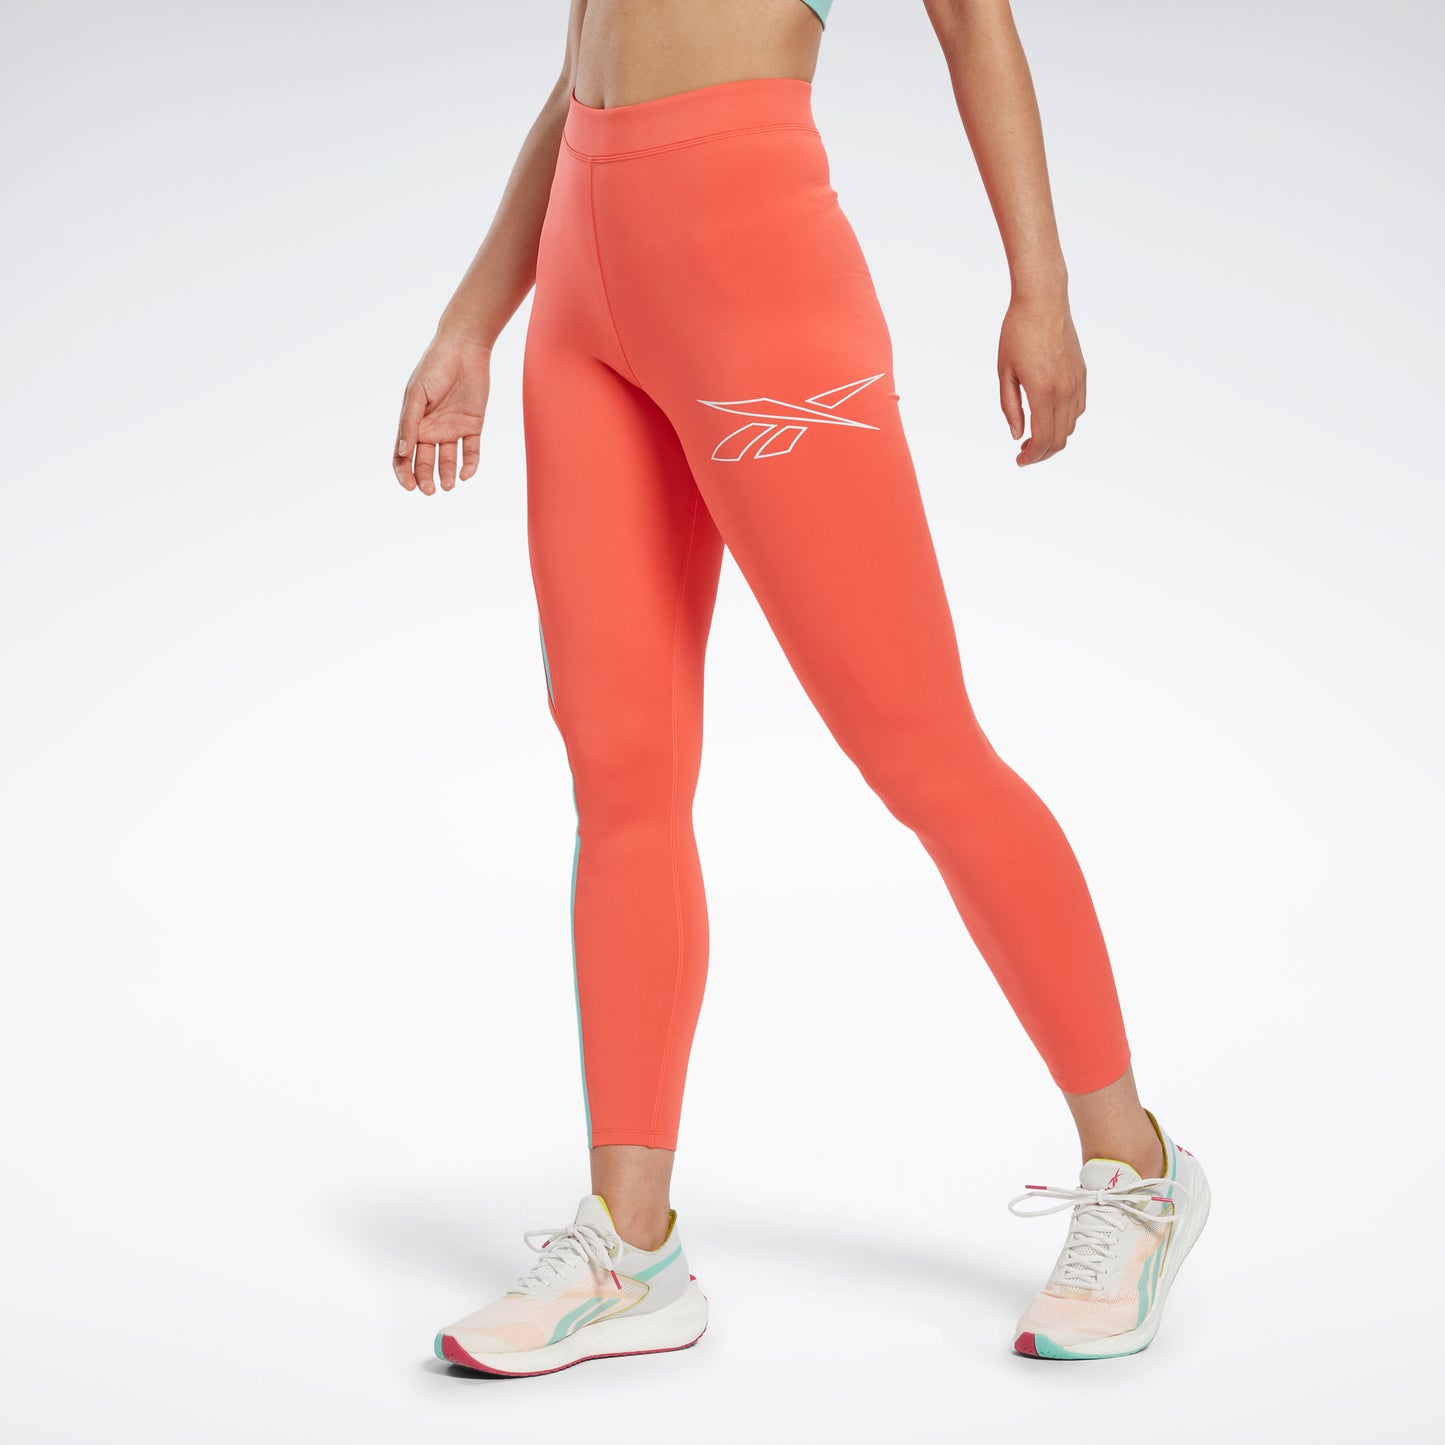 Reebok Classics Ribbed Leggings, Twisted Coral, S 